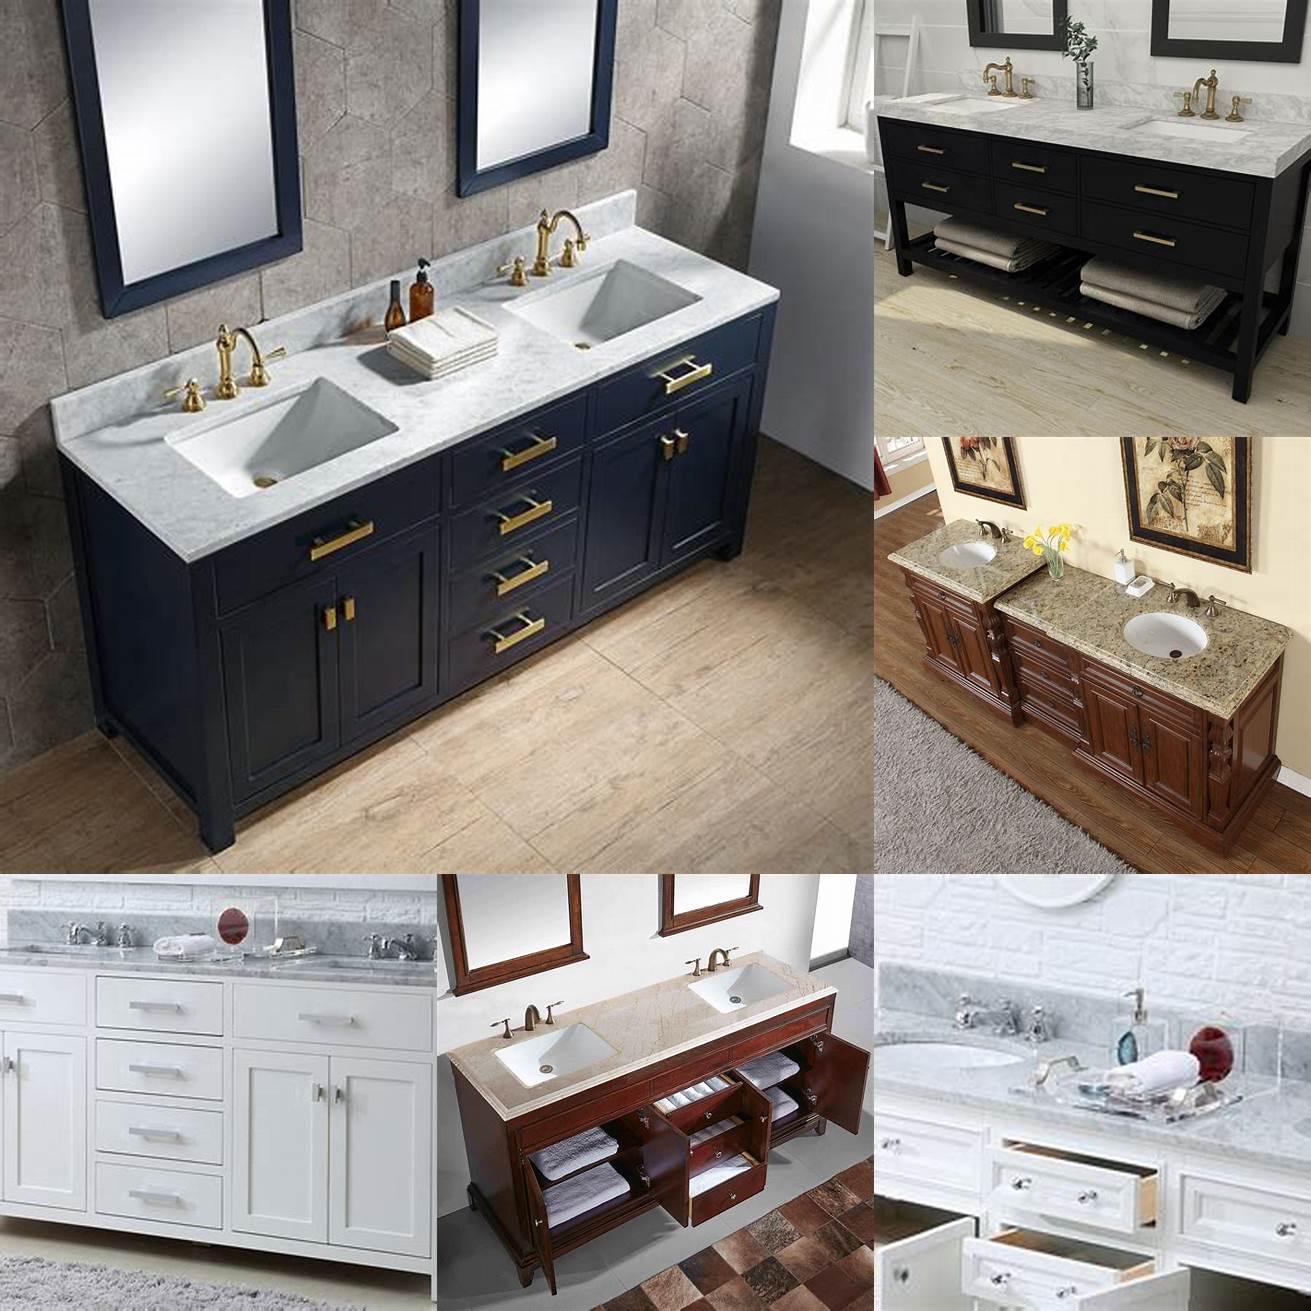 A modern double sink bathroom vanity top with a marble countertop